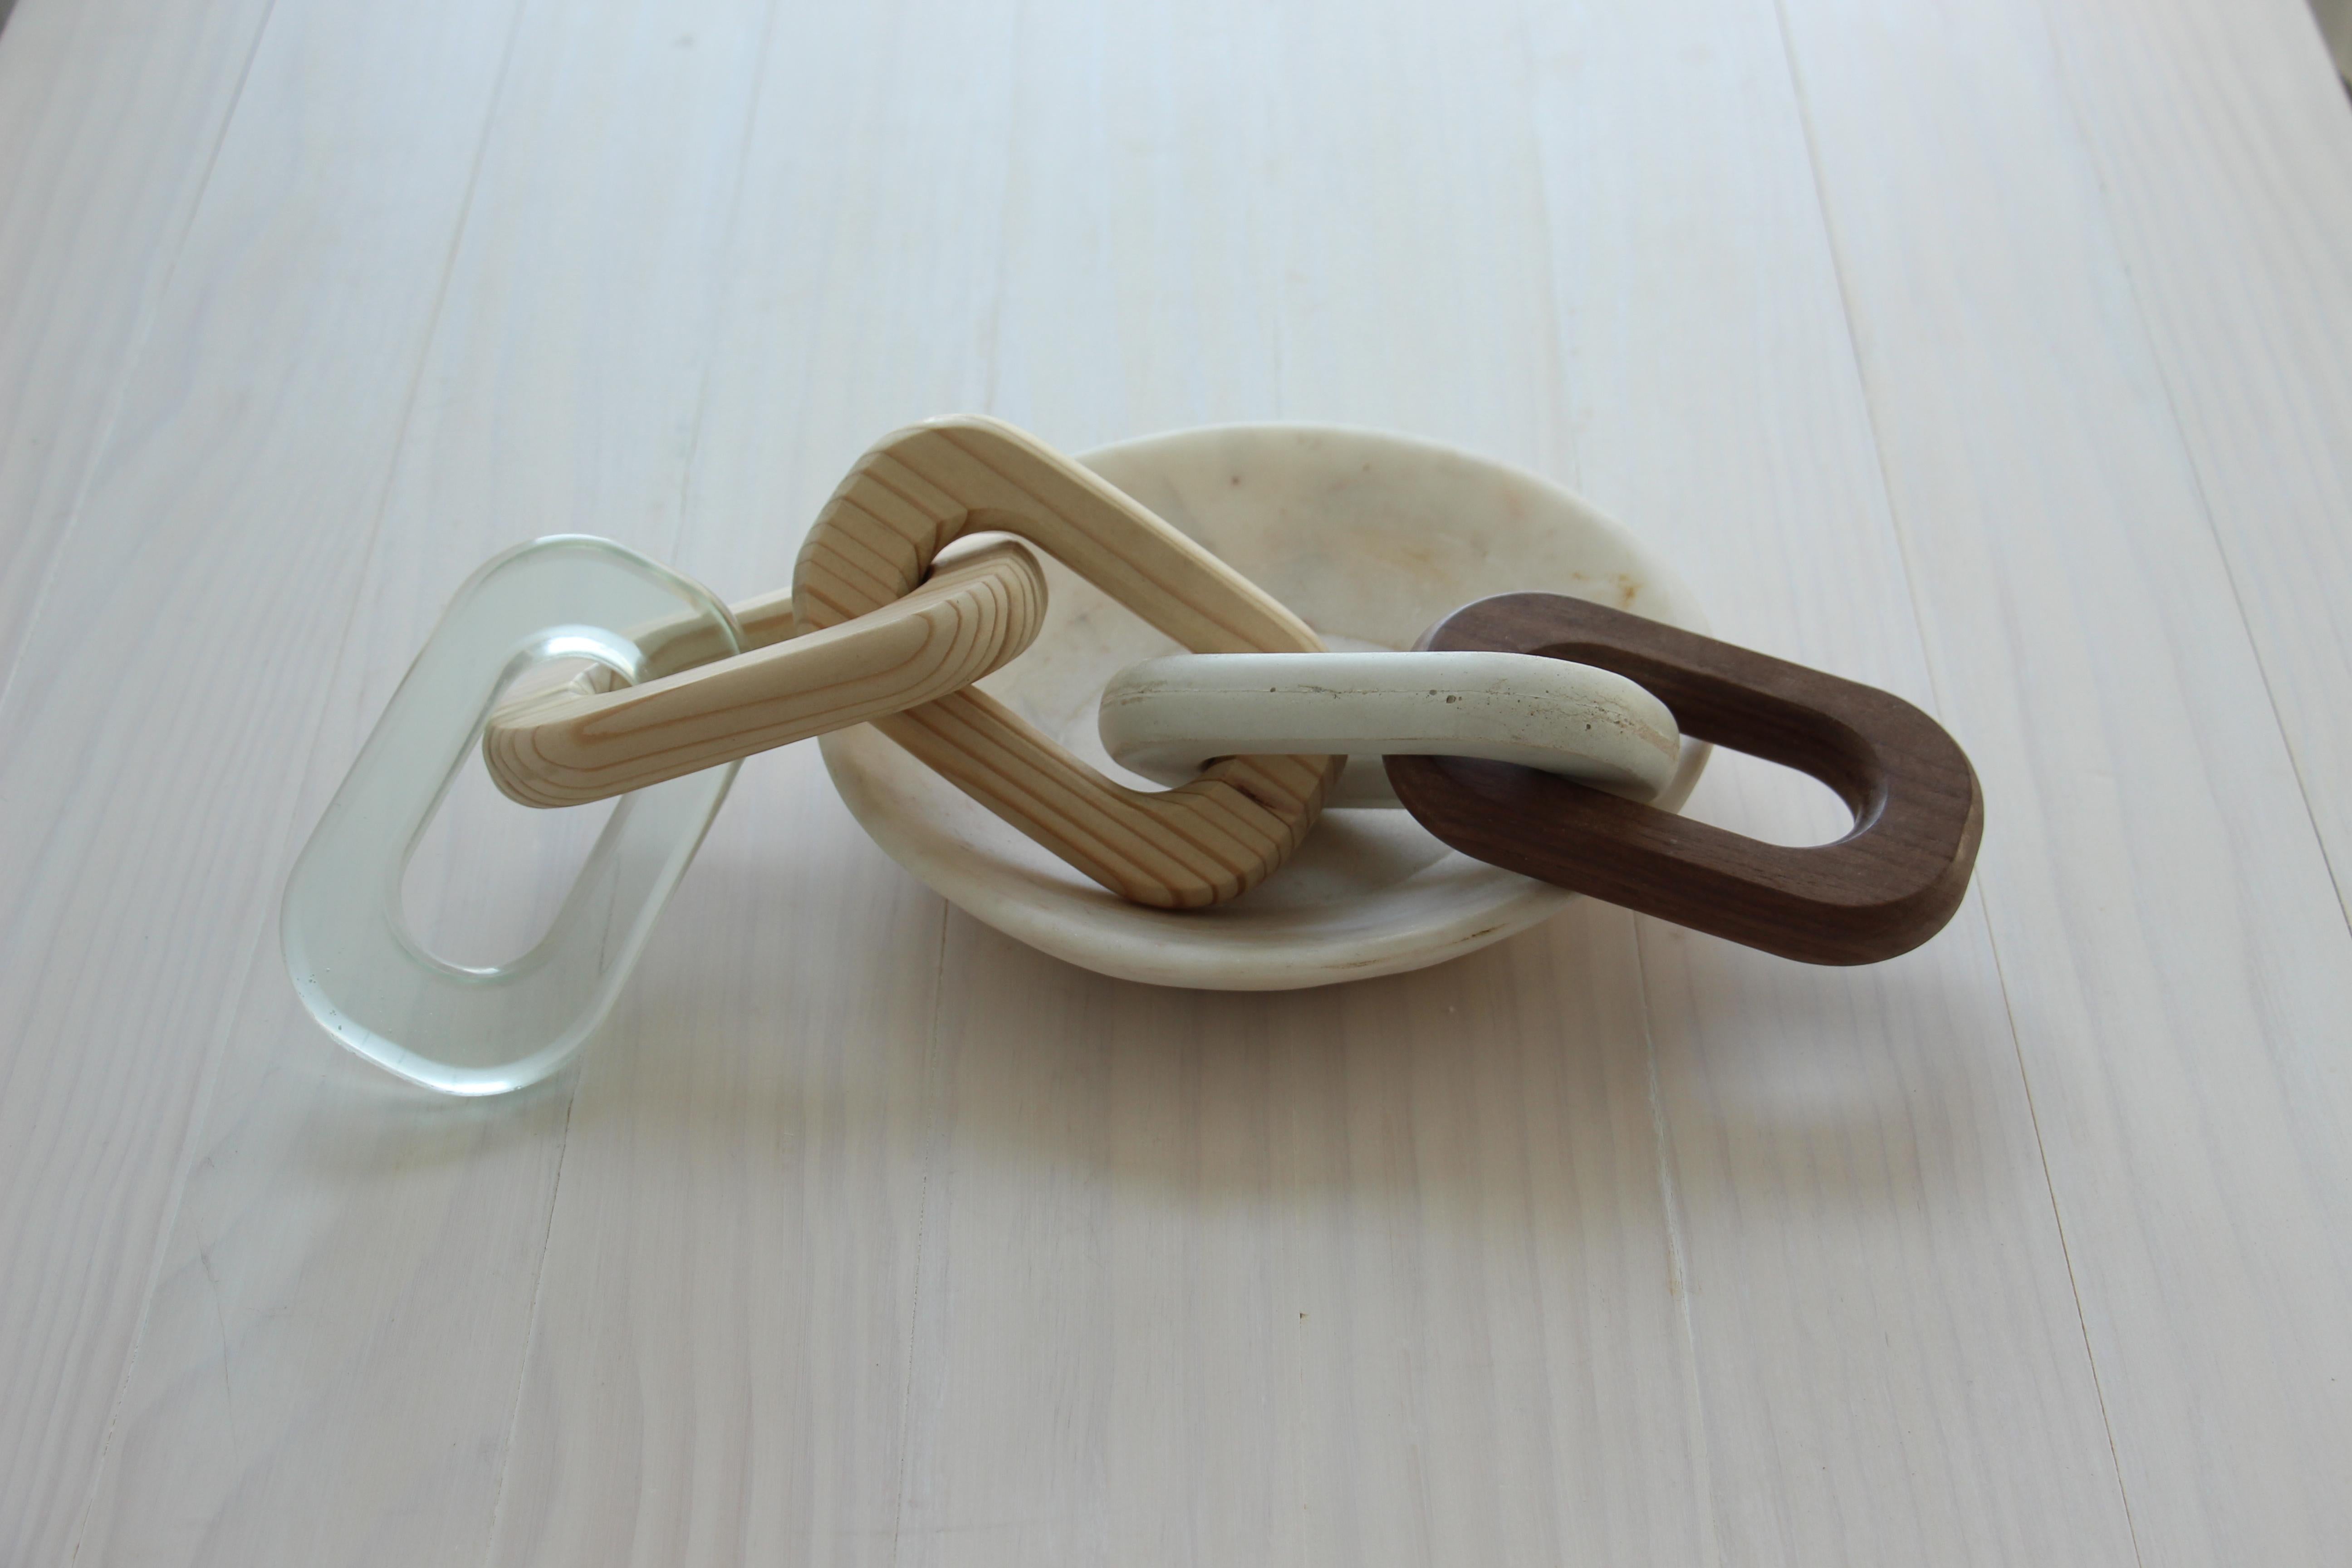 American Links Decorative Chain Sculpture in Walnut, Fir, Concrete and Resin - In Stock For Sale